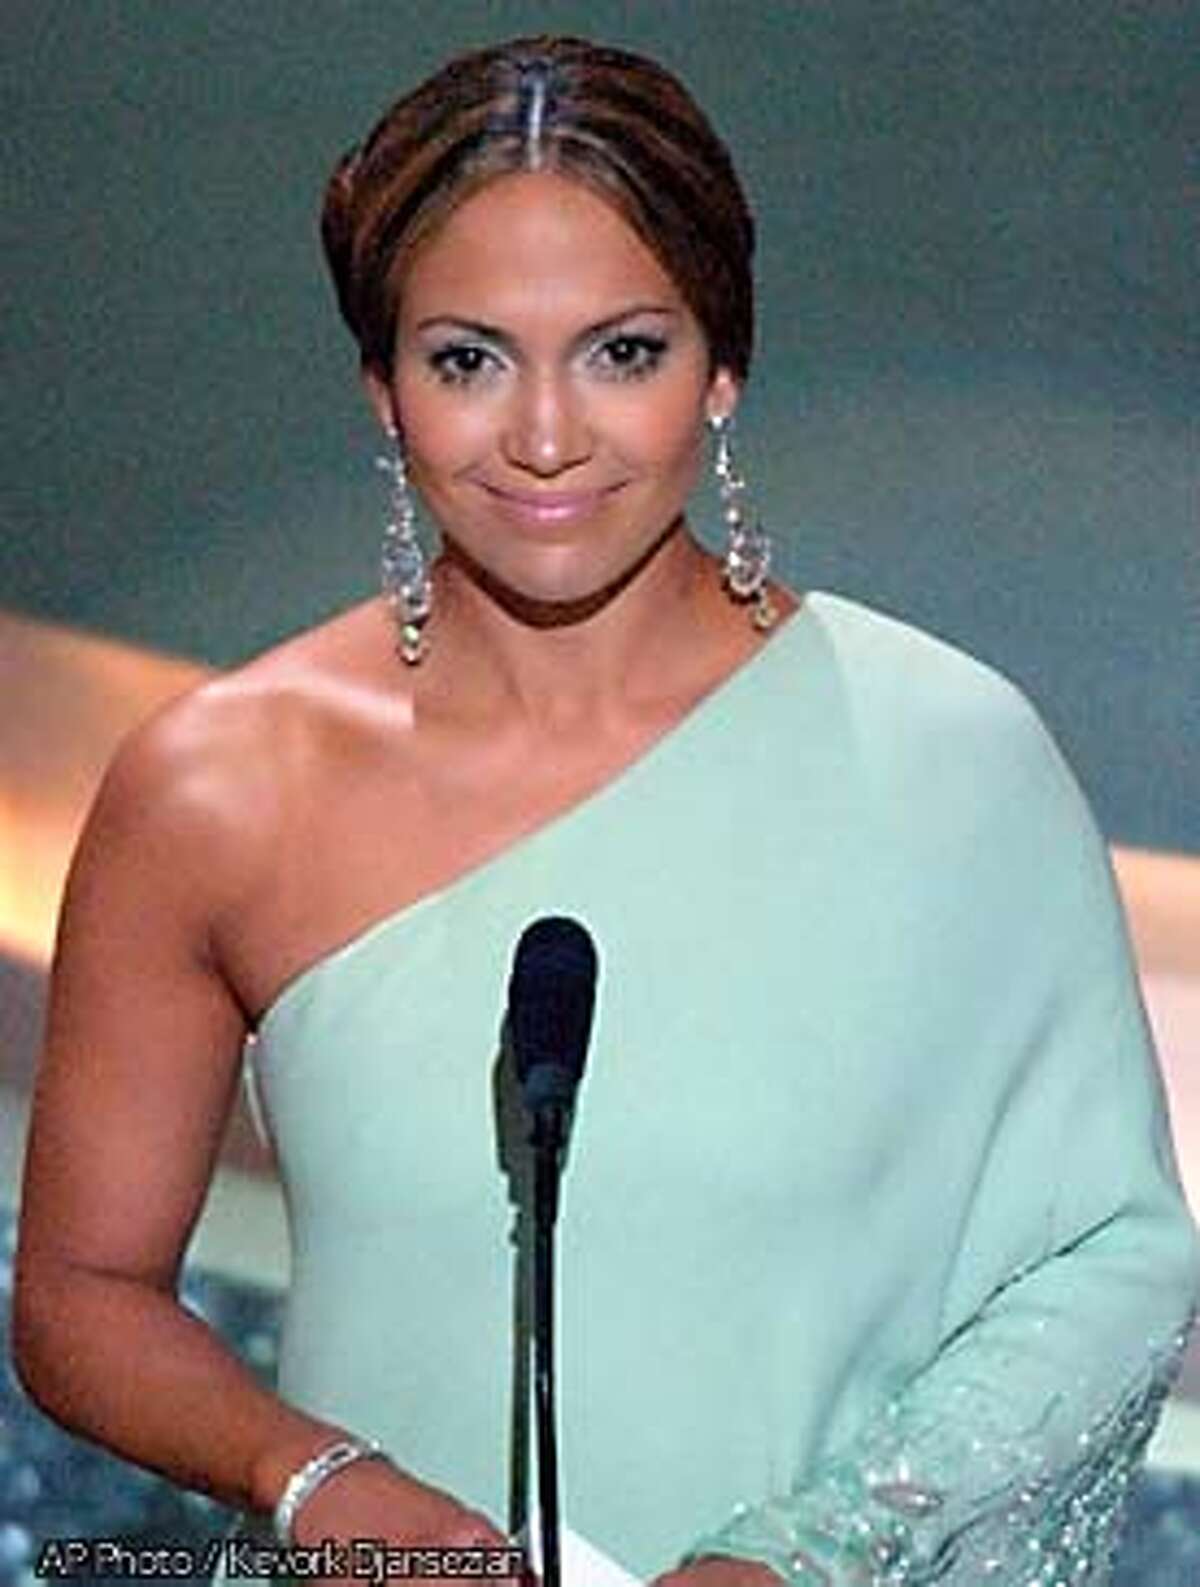 **EMBARGOED AT THE REQUEST OF THE MOTION PICTURE ACADEMY FOR USE UPON CONCLUSION OF ACADEMY AWARDS TELECAST** Actress Jennifer Lopez presents the award for art direction at the 75th annual Academy Awards on Sunday, March 23, 2003, in Los Angeles. (AP Photo/Kevork Djansezian)